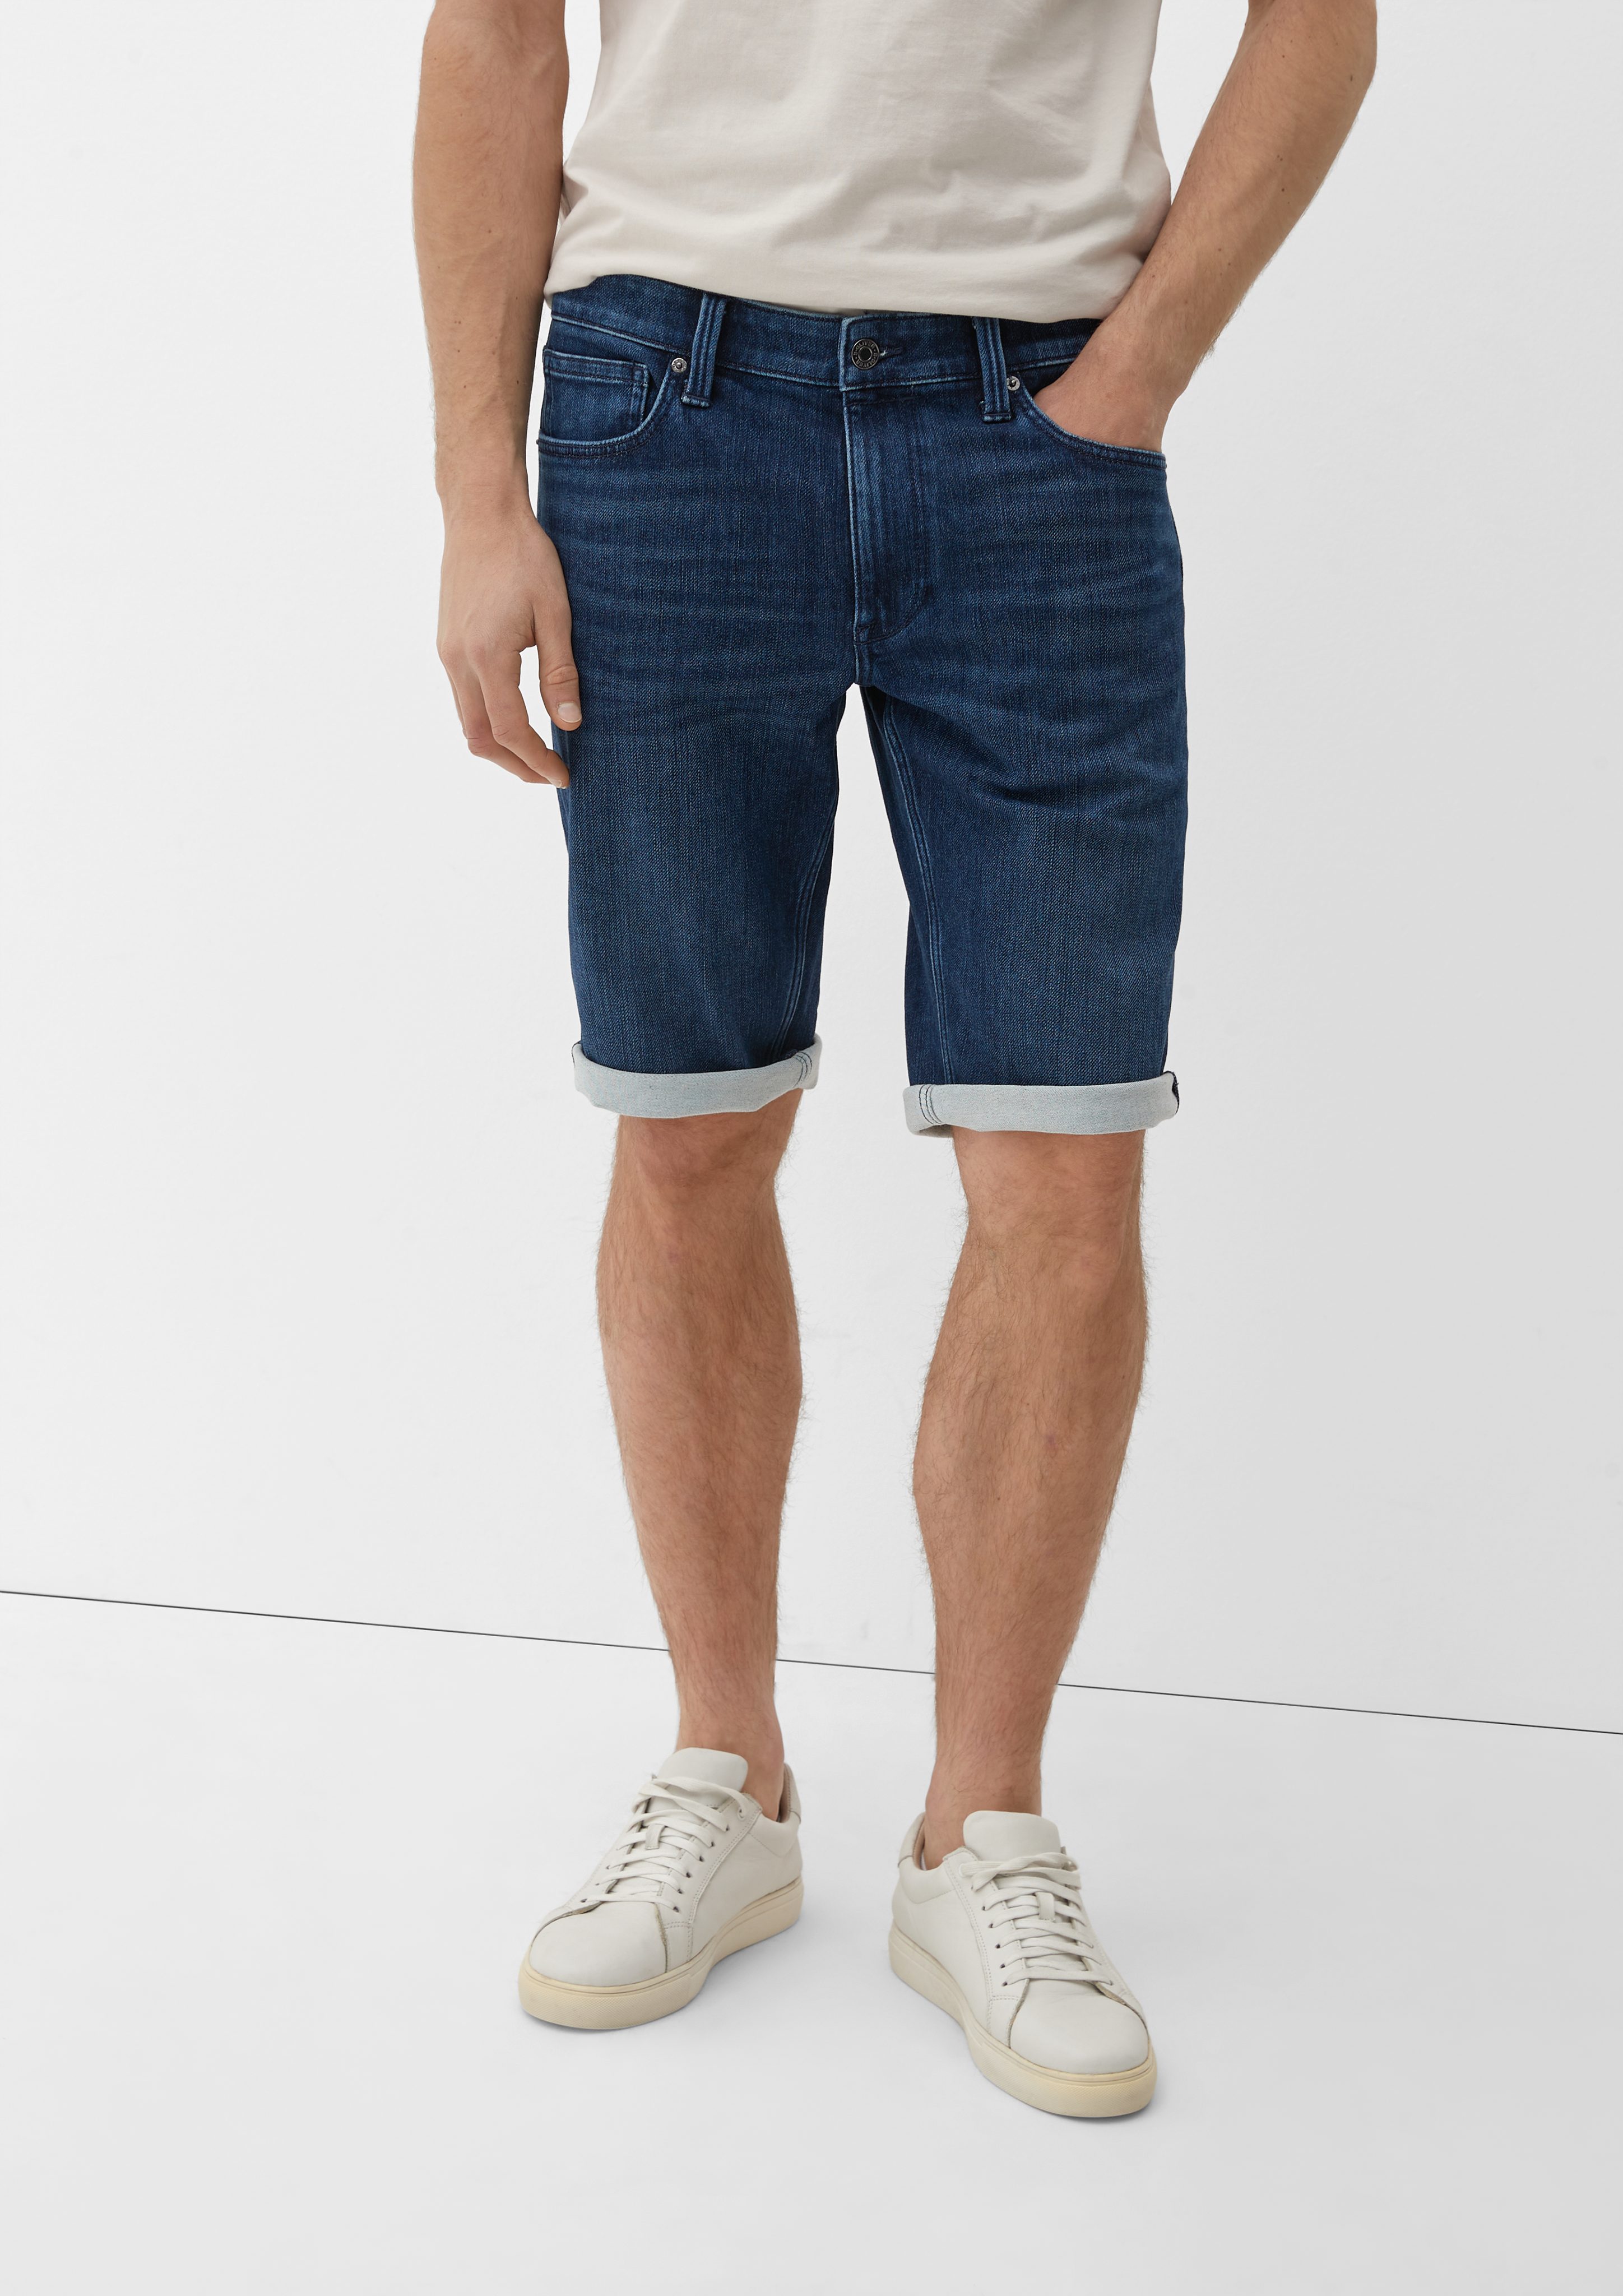 / Leg Jeans-Shorts s.Oliver Waschung Jeansshorts Fit Rise Regular Mid / Straight /